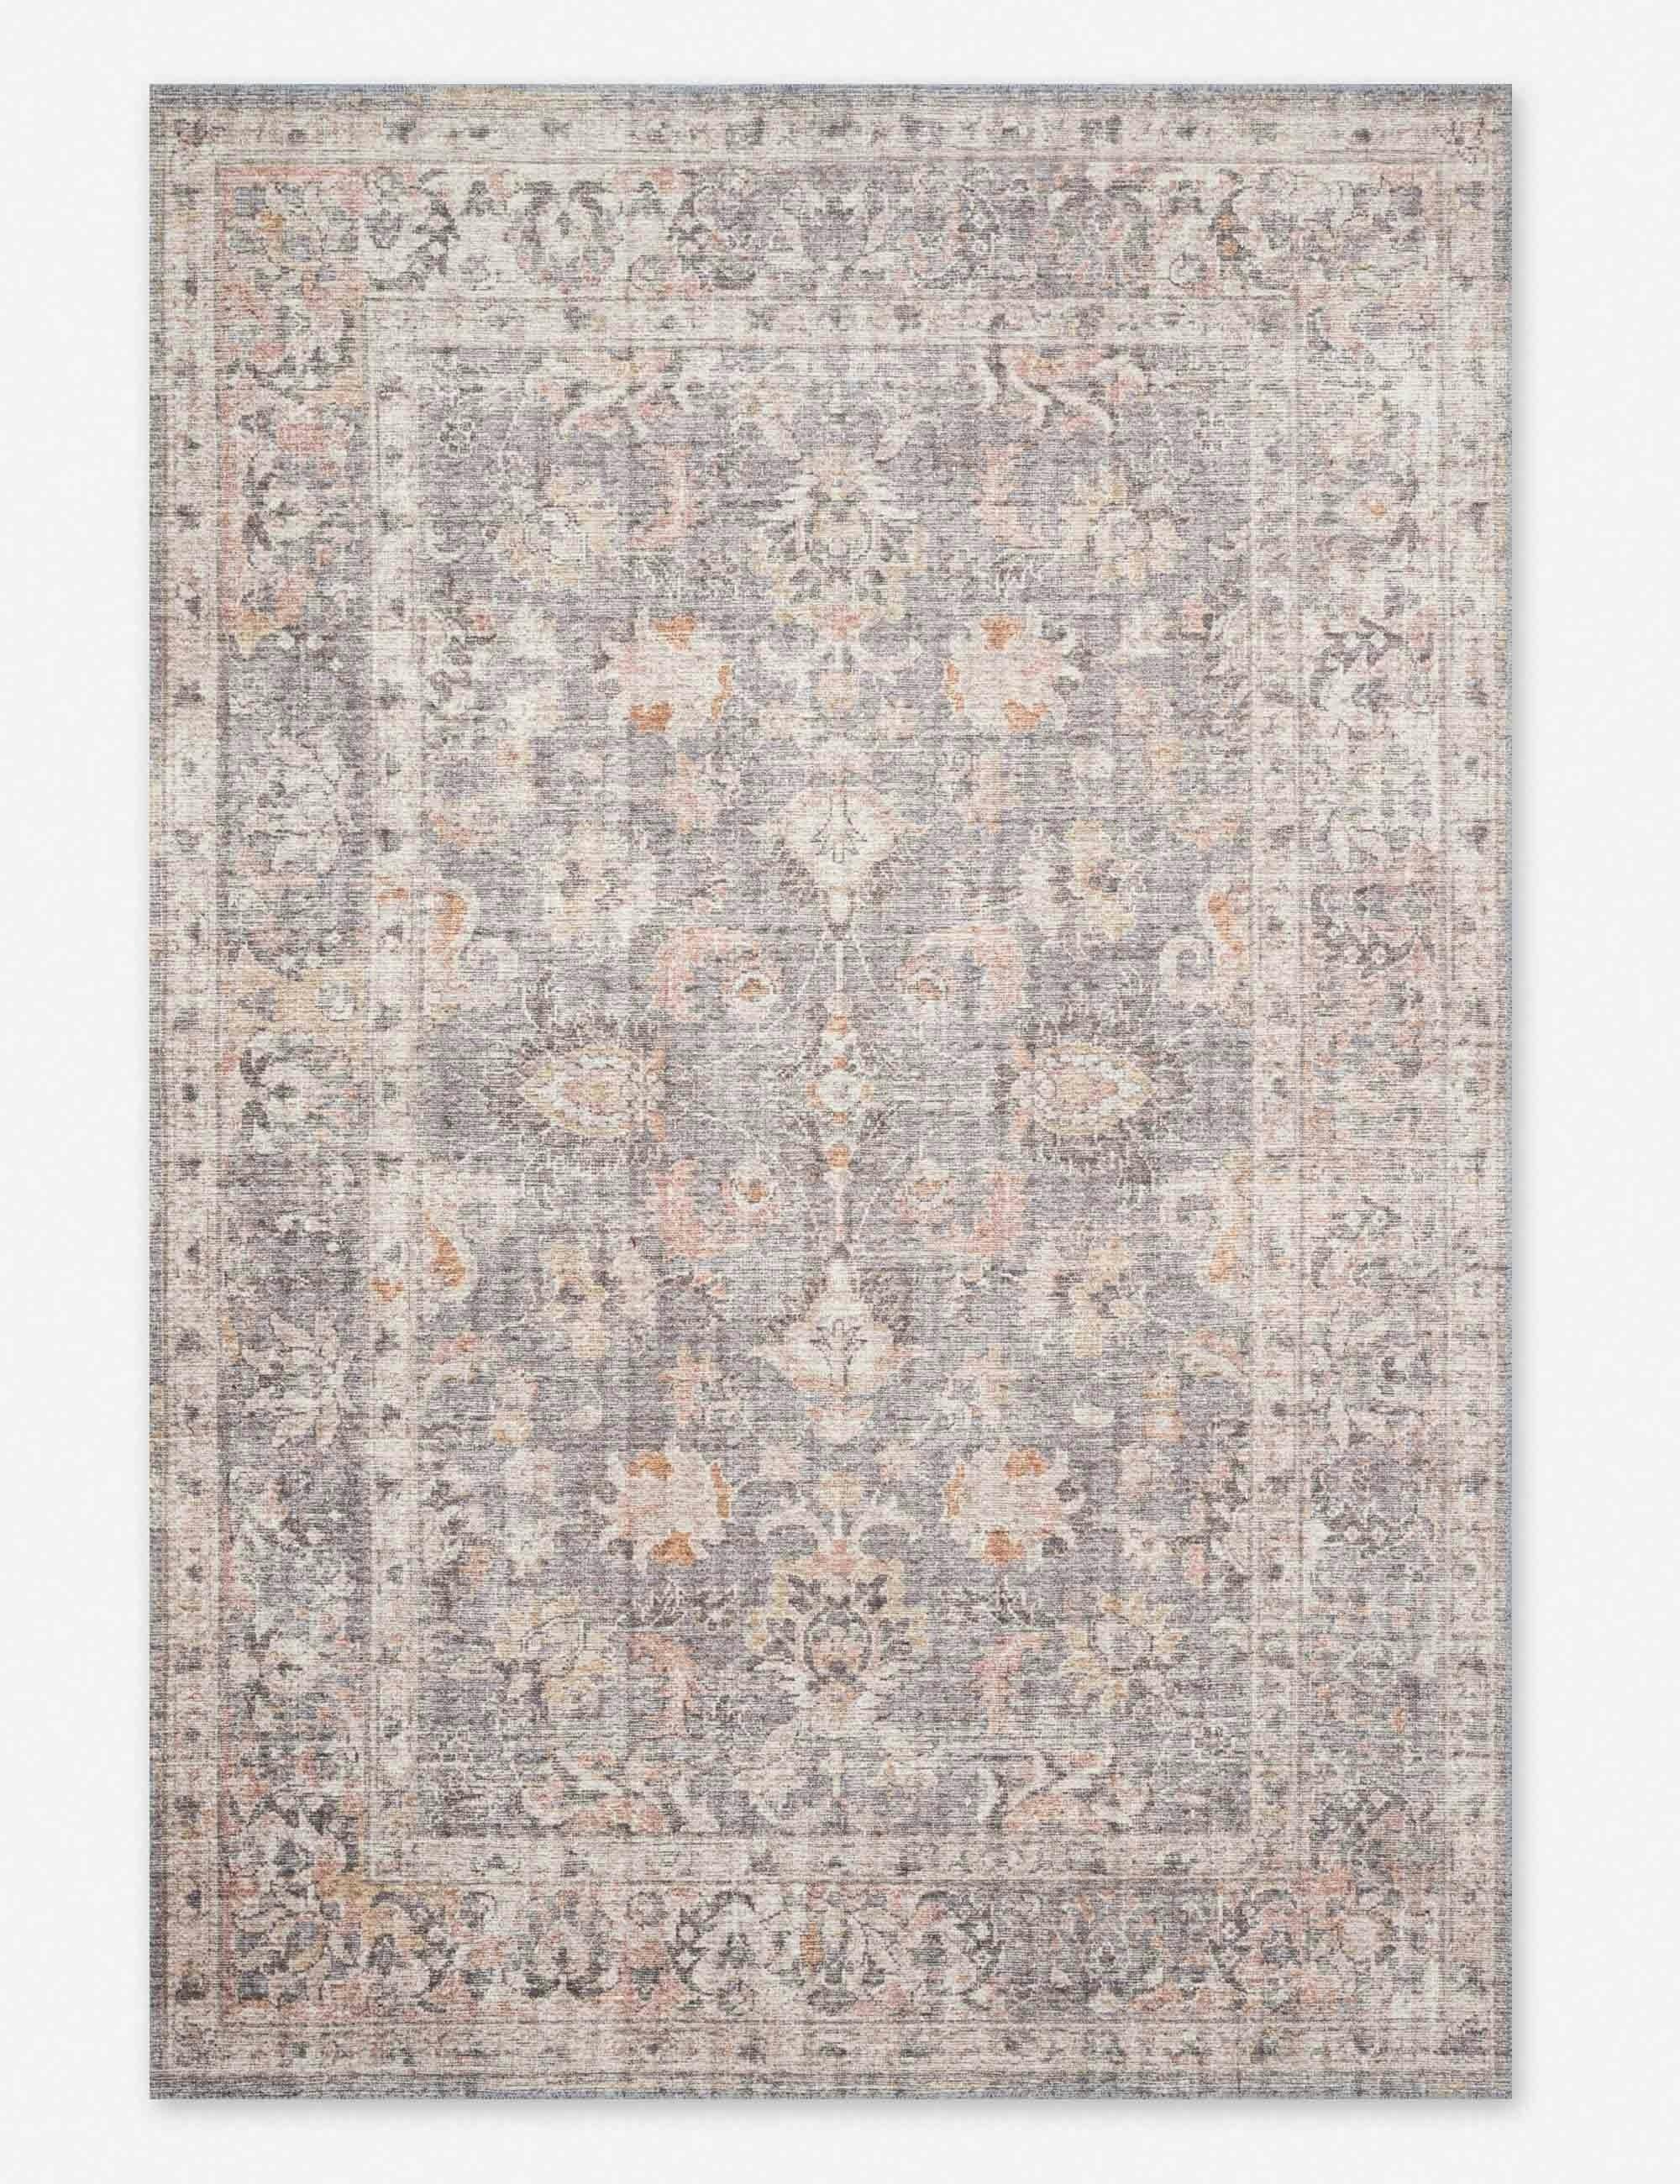 Vintage Inspired Grey and Apricot Oriental Area Rug - 5' x 7'